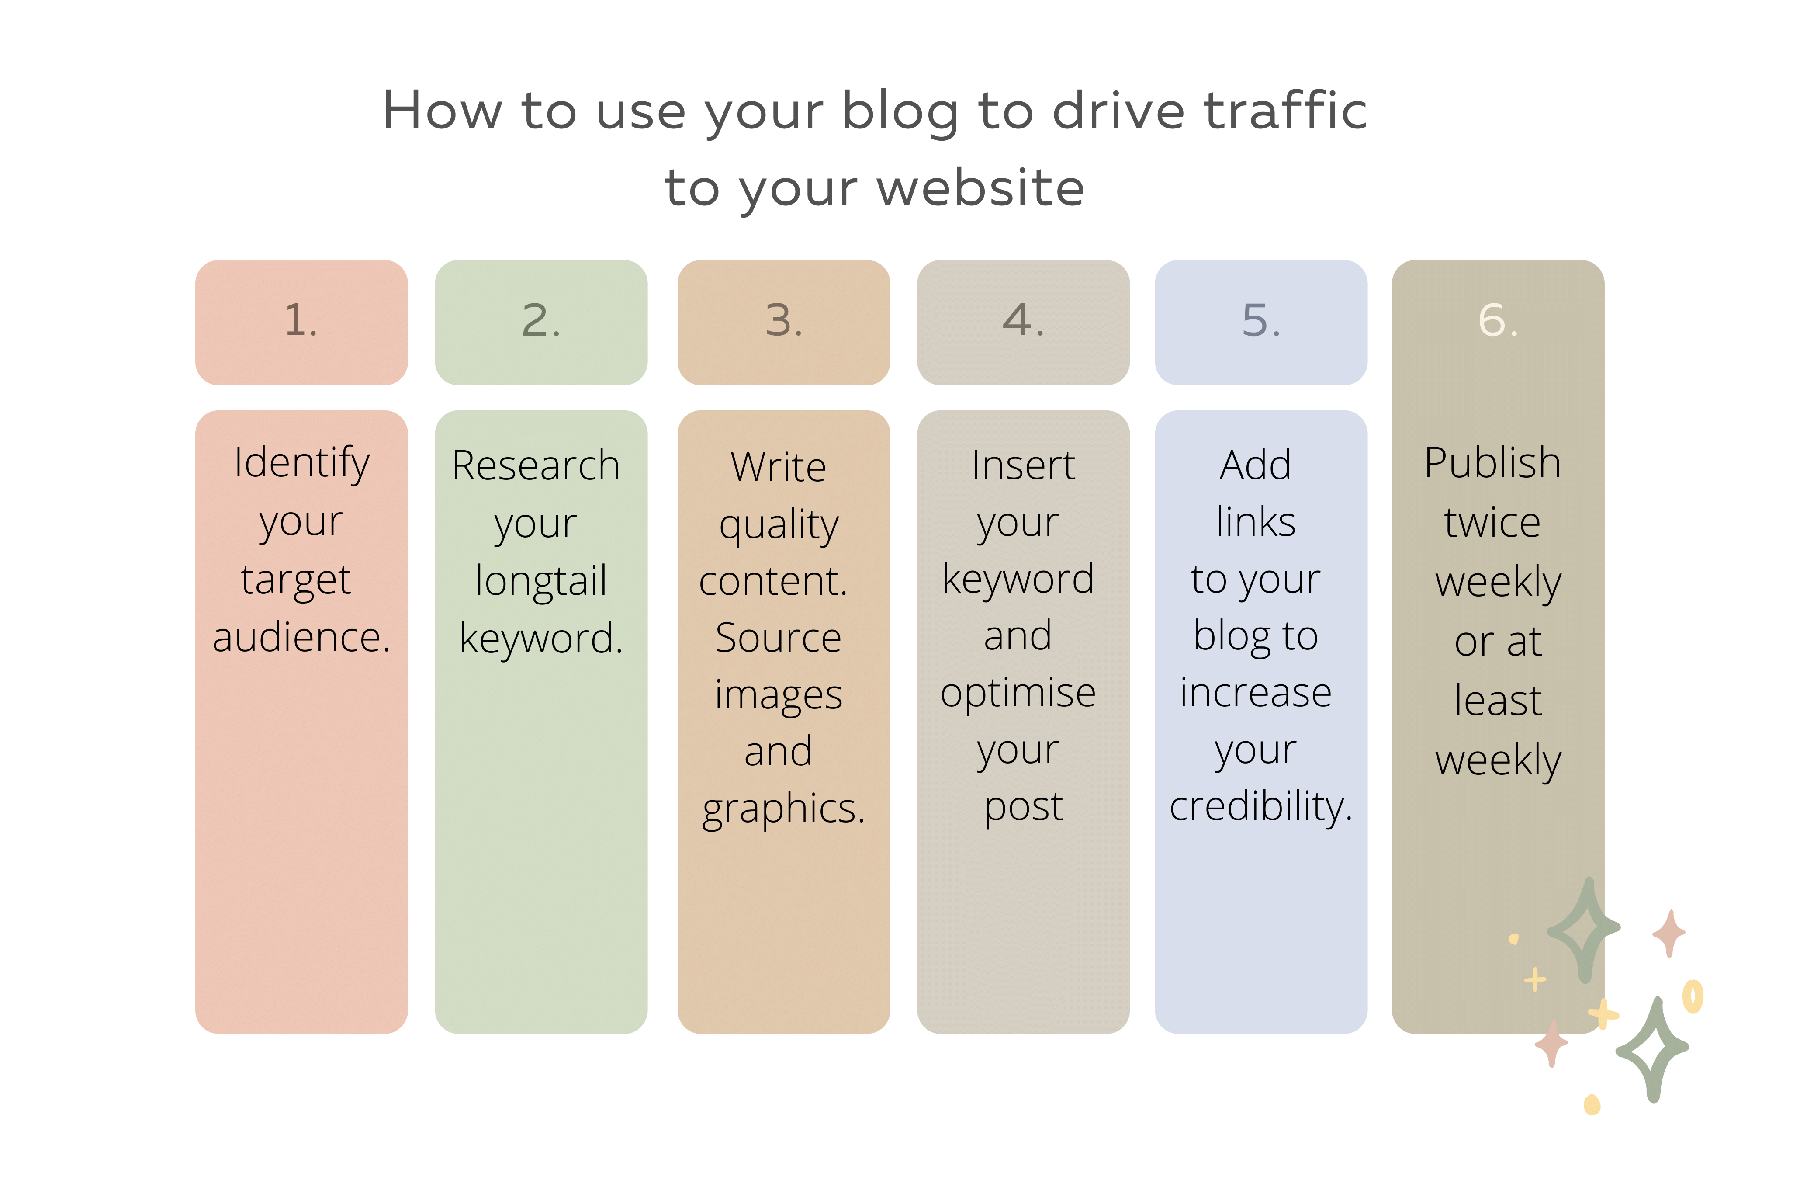 Infographic showing how to use clever blog writing to drive traffic to your website.